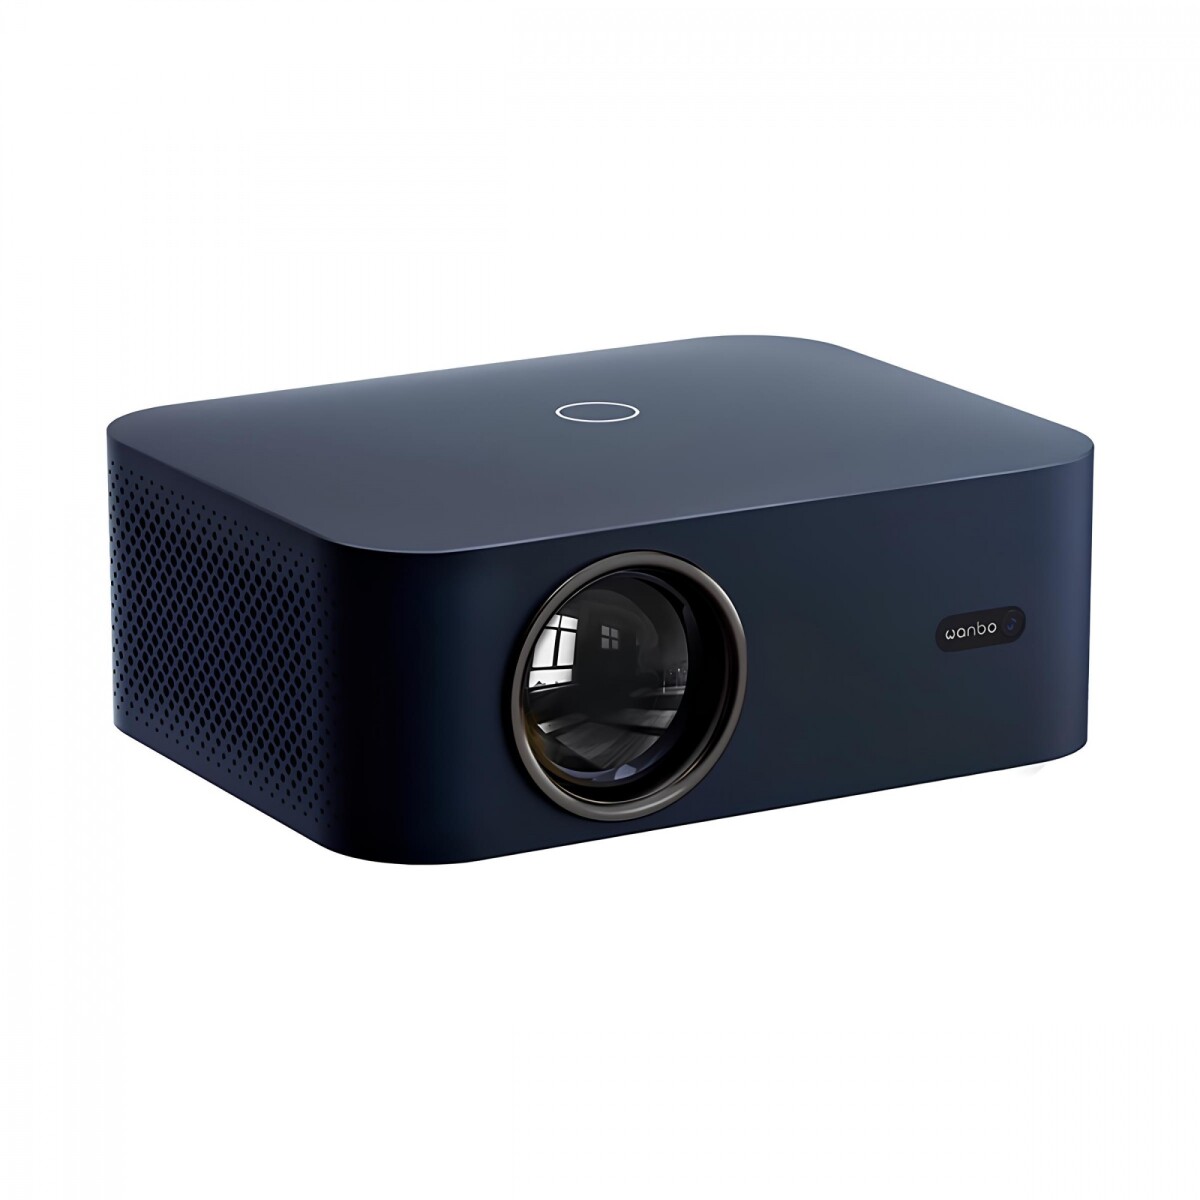 Proyector Wanbo X2 Max Blue